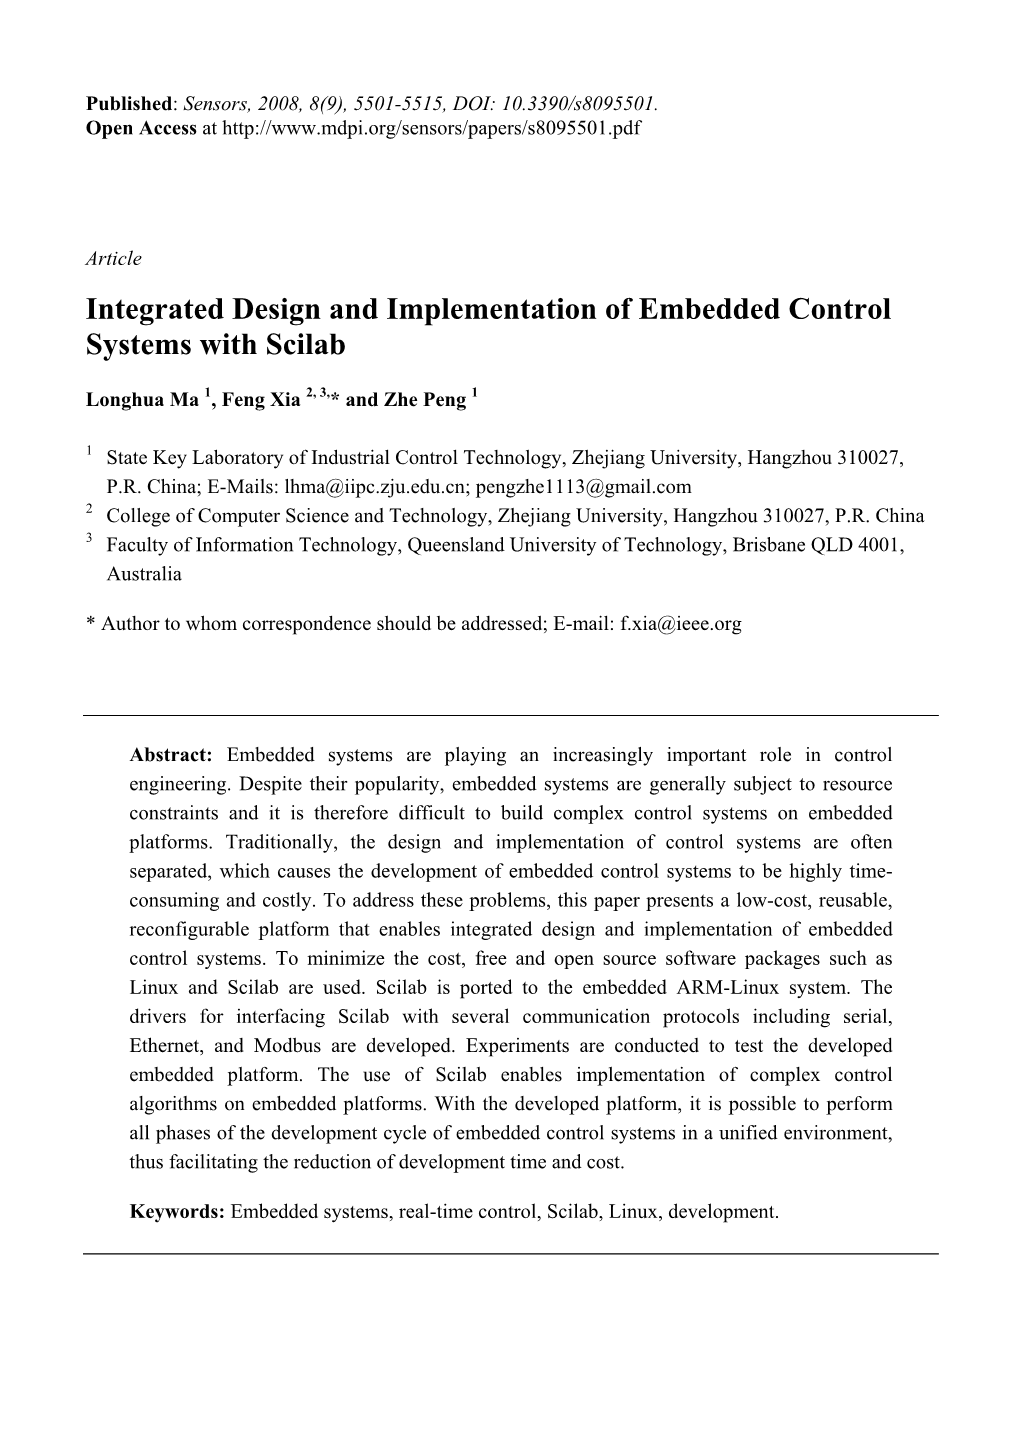 Integrated Design and Implementation of Embedded Control Systems with Scilab